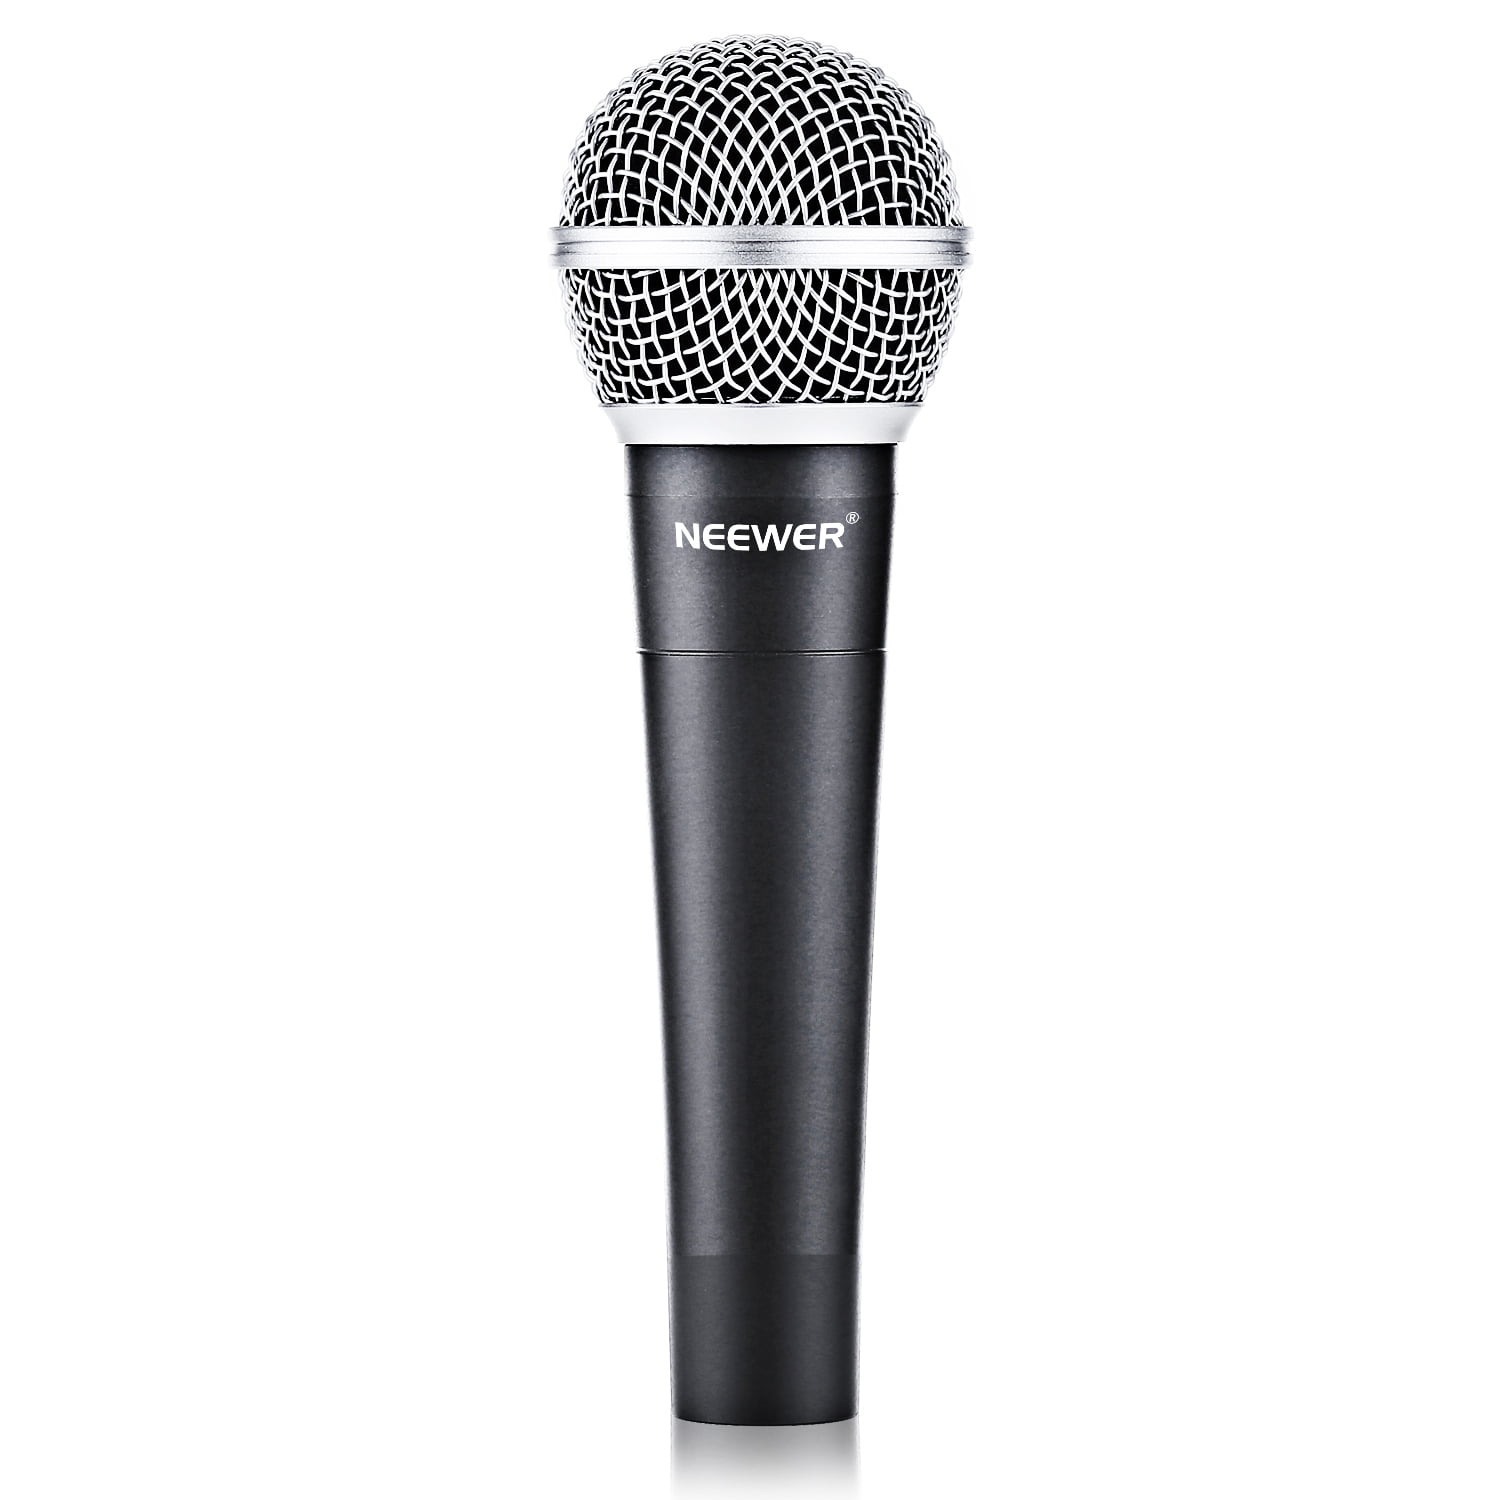 Neewer® Zinc Alloy Black Professional Moving Coil Handheld Dynamic Microphone for Kareoke,Stage,Home Studio Recording with 1/4 Male to XLR Female Cable 